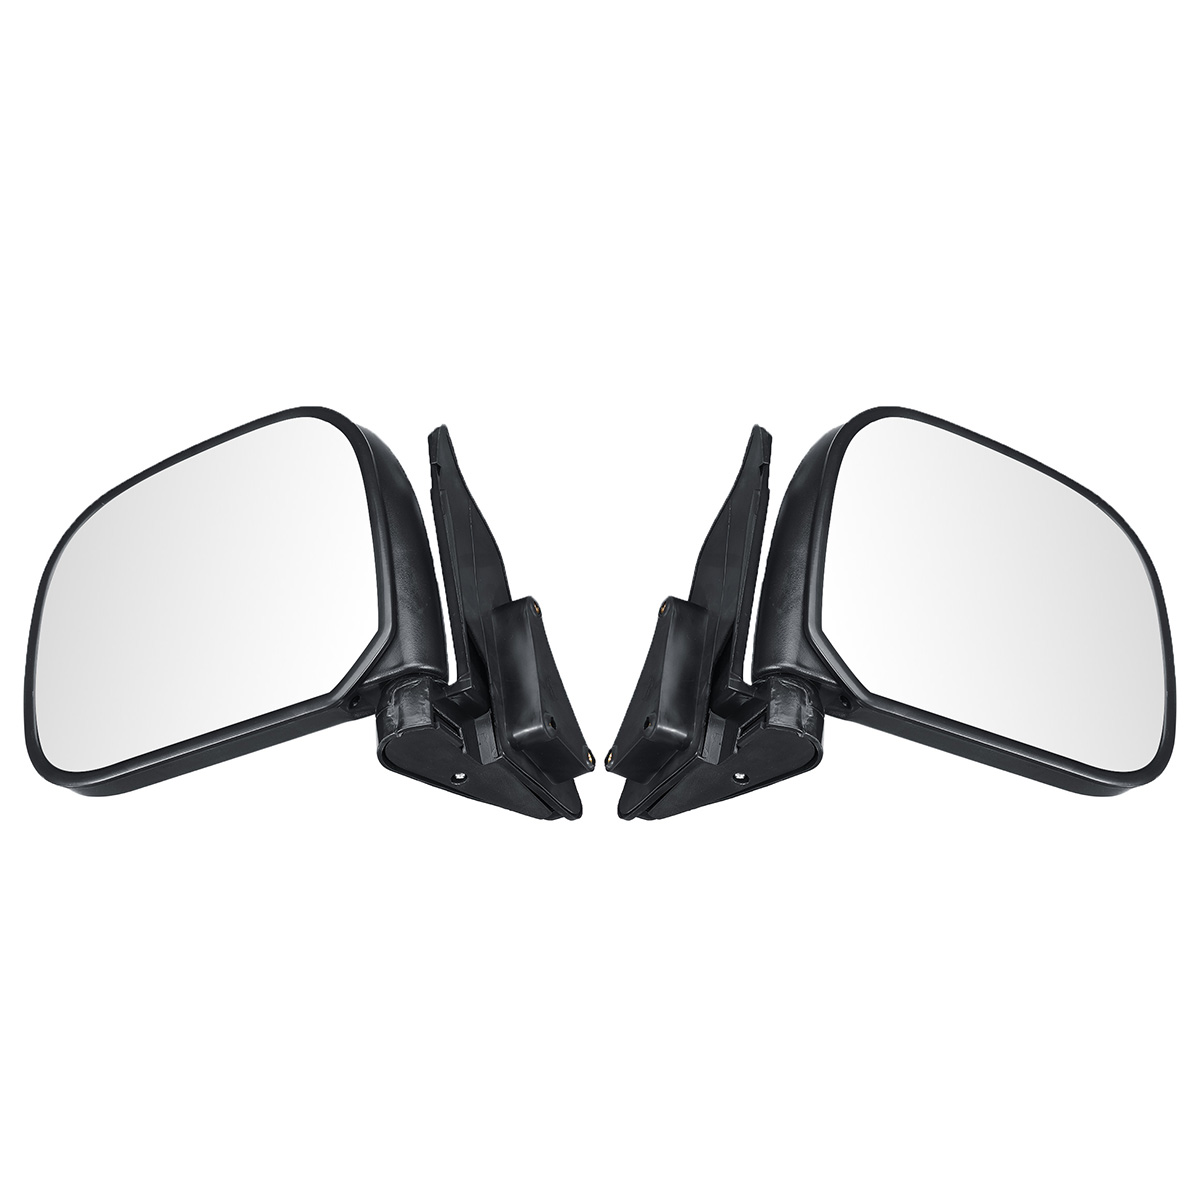 Car-Manual-Door-Rearview-Mirror-with-Glass-LeftRight-for-Toyota-Hiace-H100-1989-2004-Right-hand-Driv-1473894